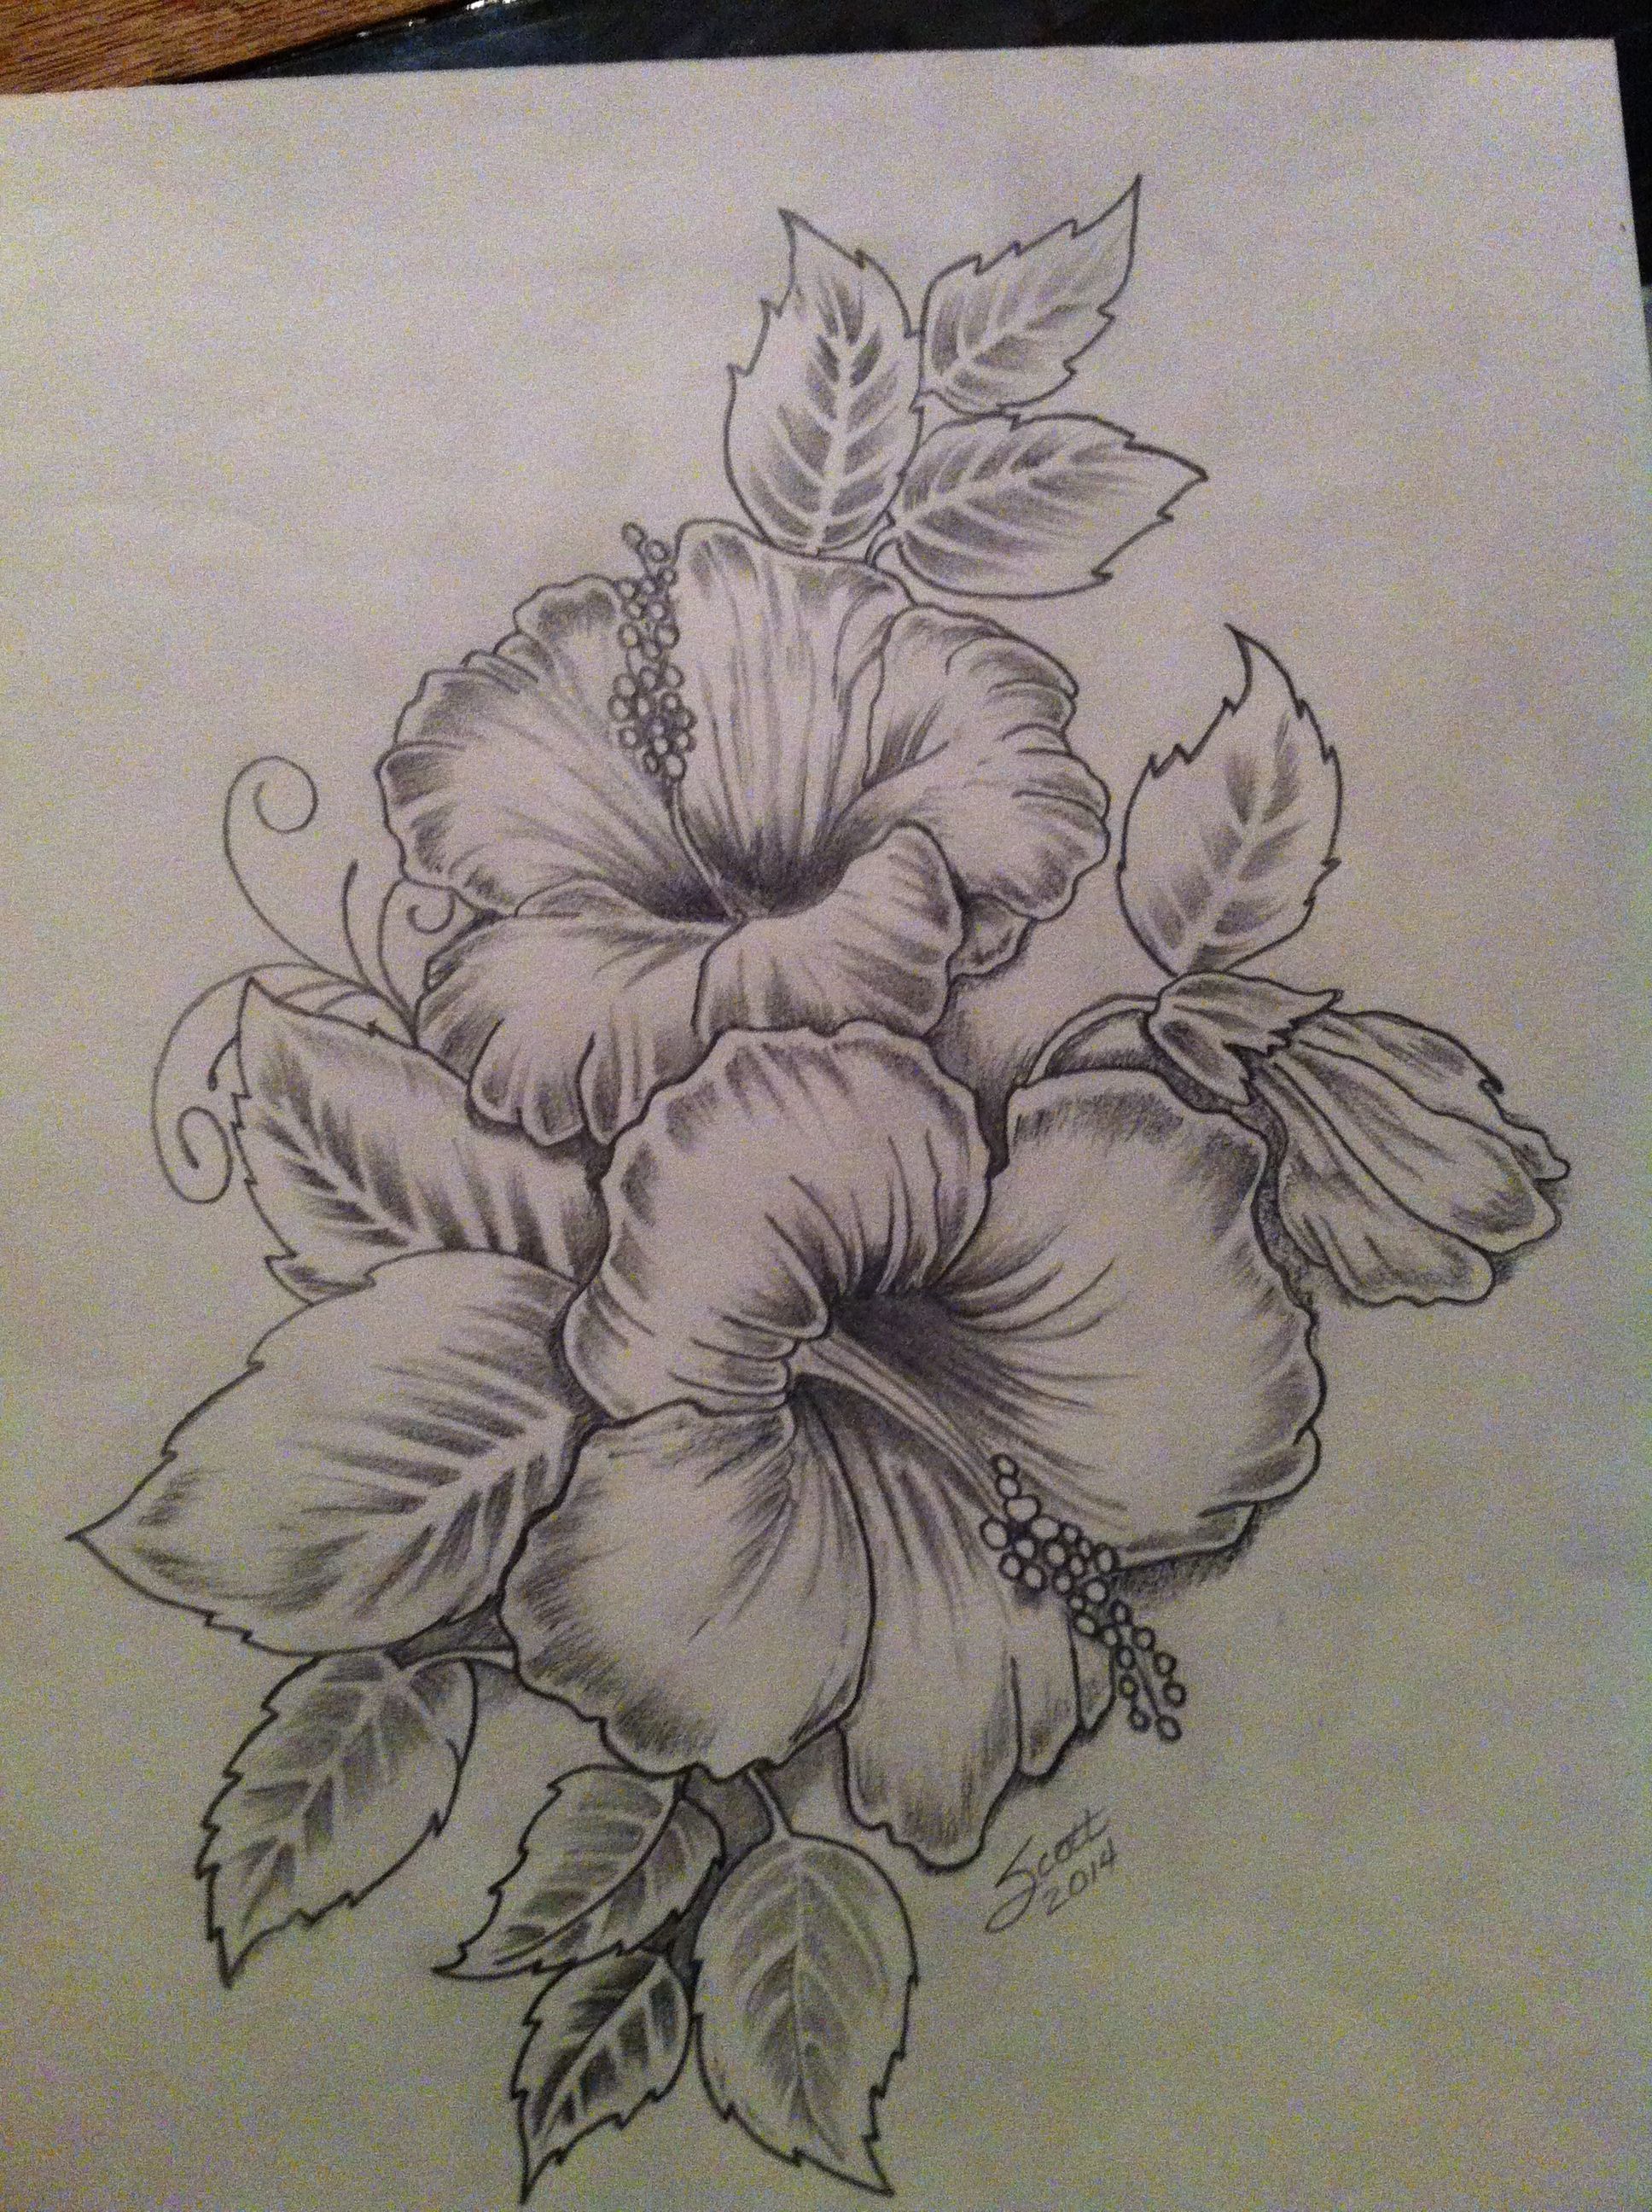 Hibiscus tattoo artwork. My take on an existing design. Will be done on a friends right shoulder. -   19 hibiscus flower tattoo
 ideas